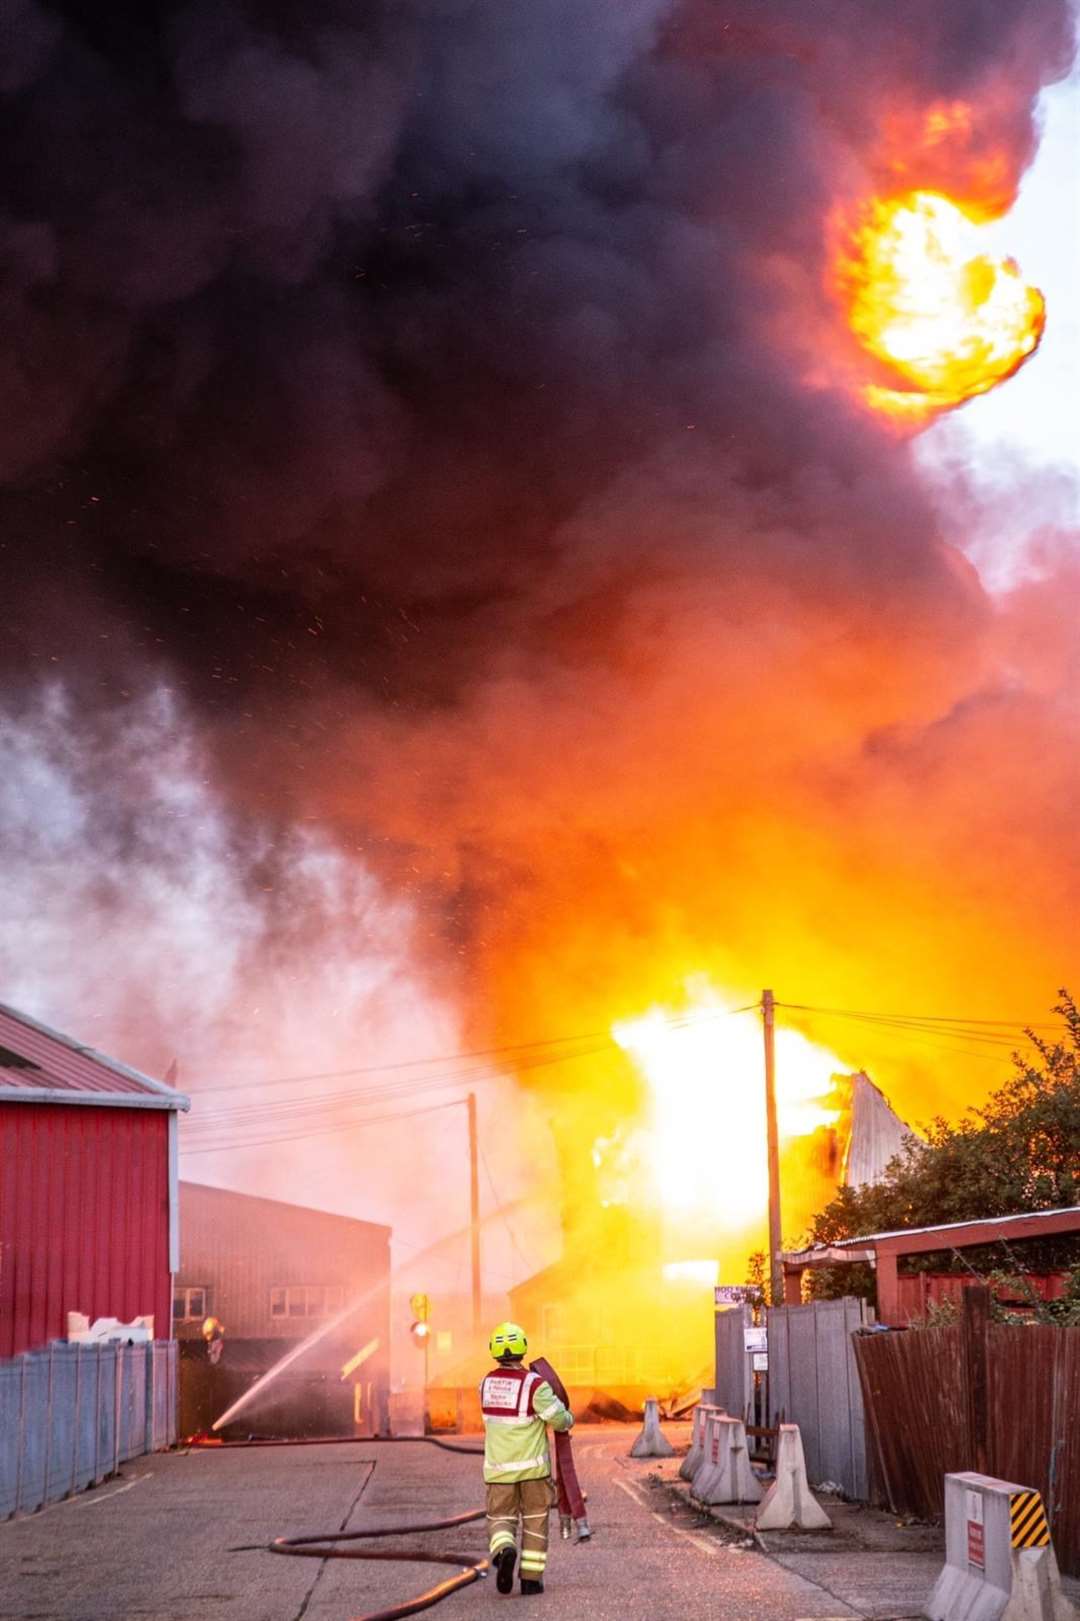 Firefighters battling the blaze on an industrial unit near Hoo Marina Park. Photos from Kent Fire and Rescue Service